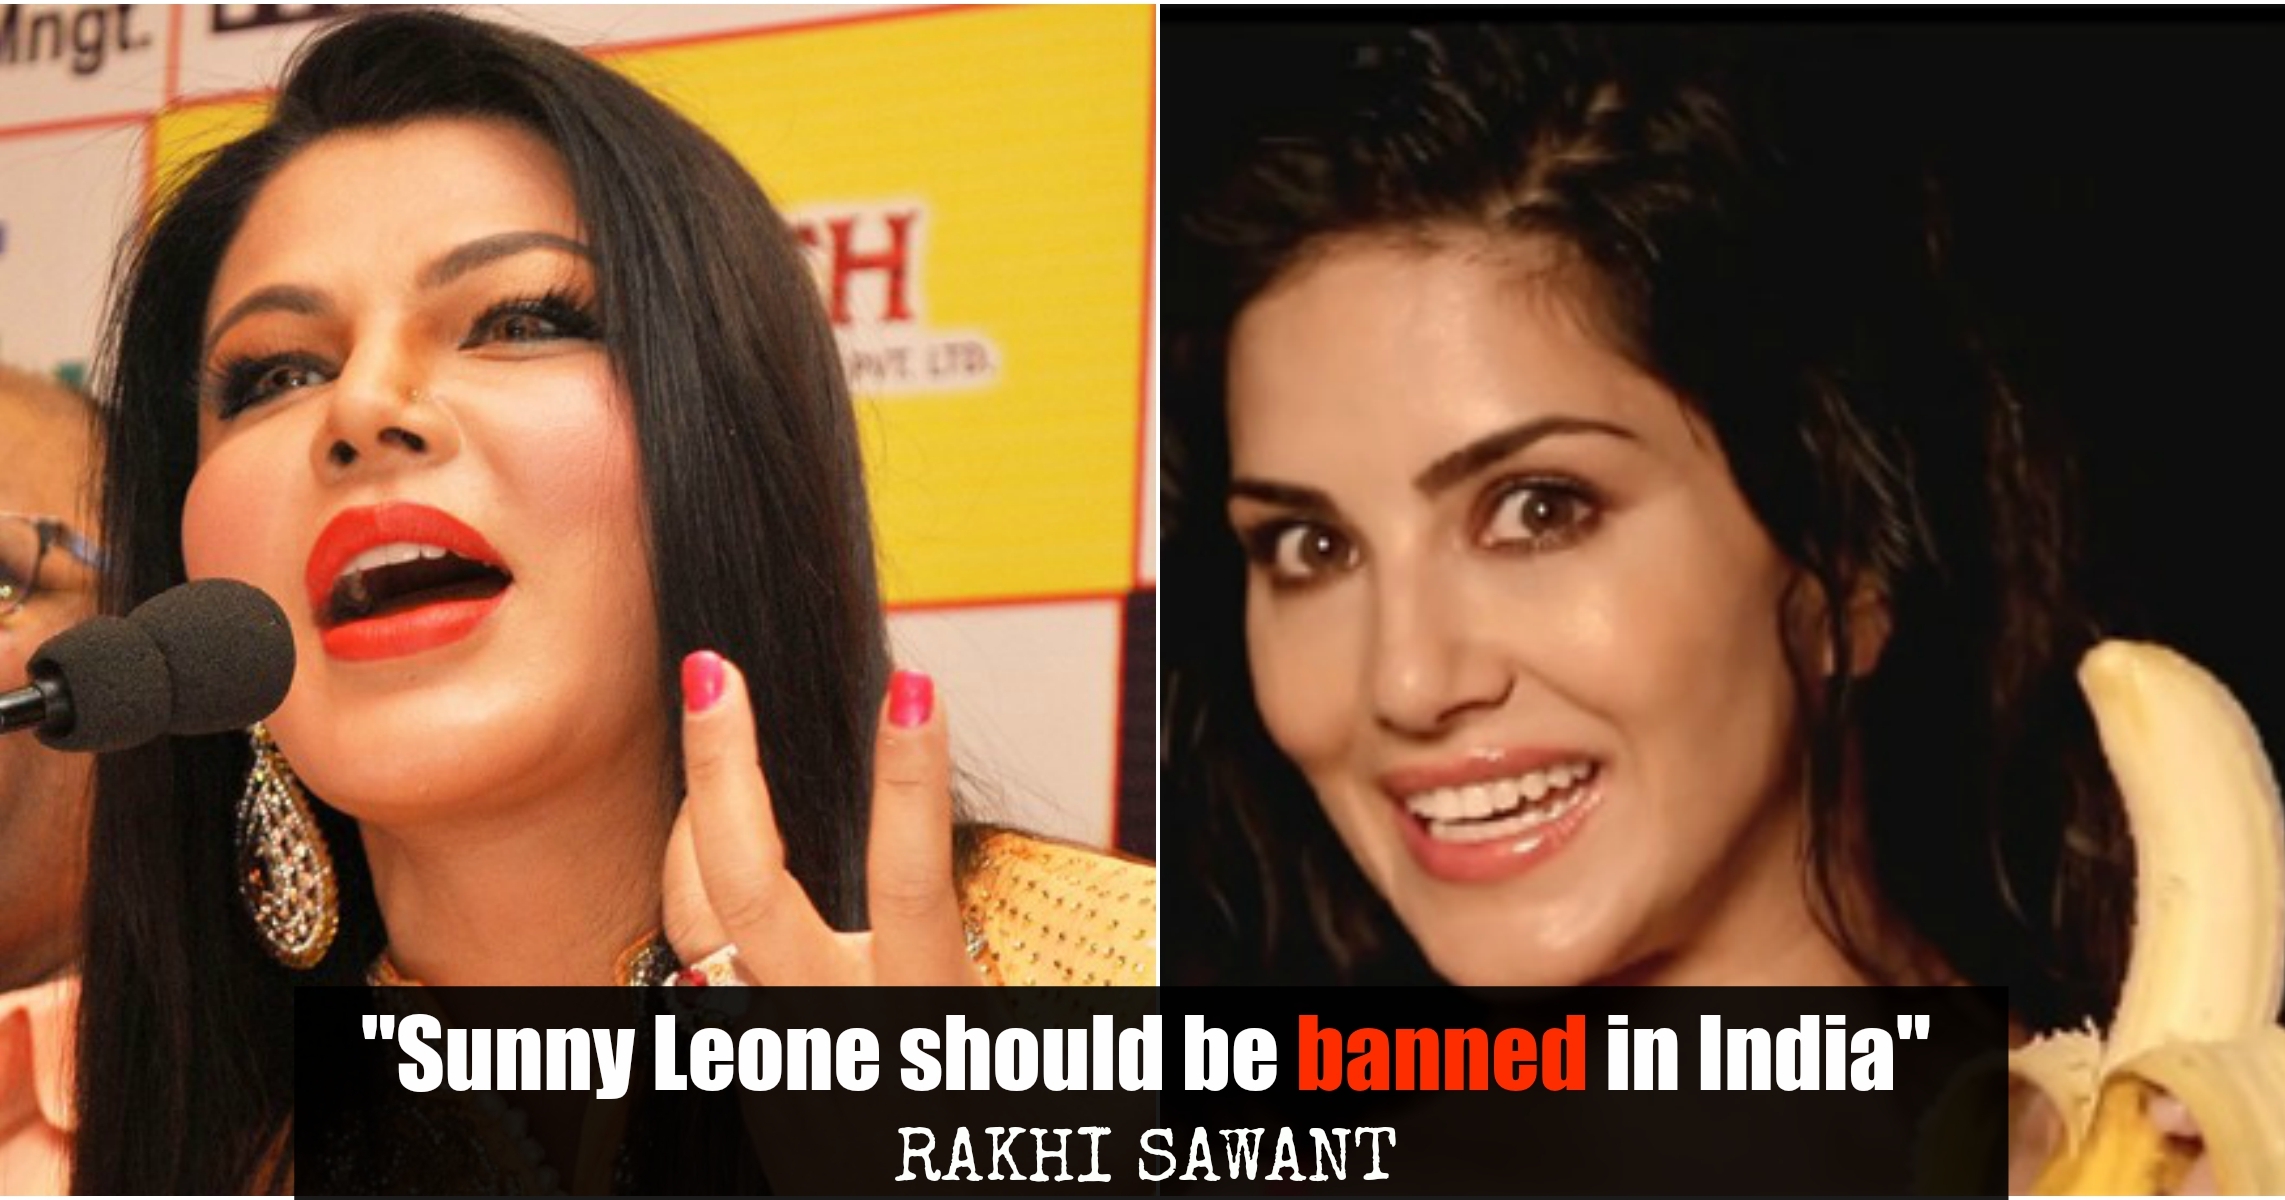 Meat Ban And Porn Ban Are Passe Drama Queen Rakhi Sawant Insists On Sunny Leone Ban 